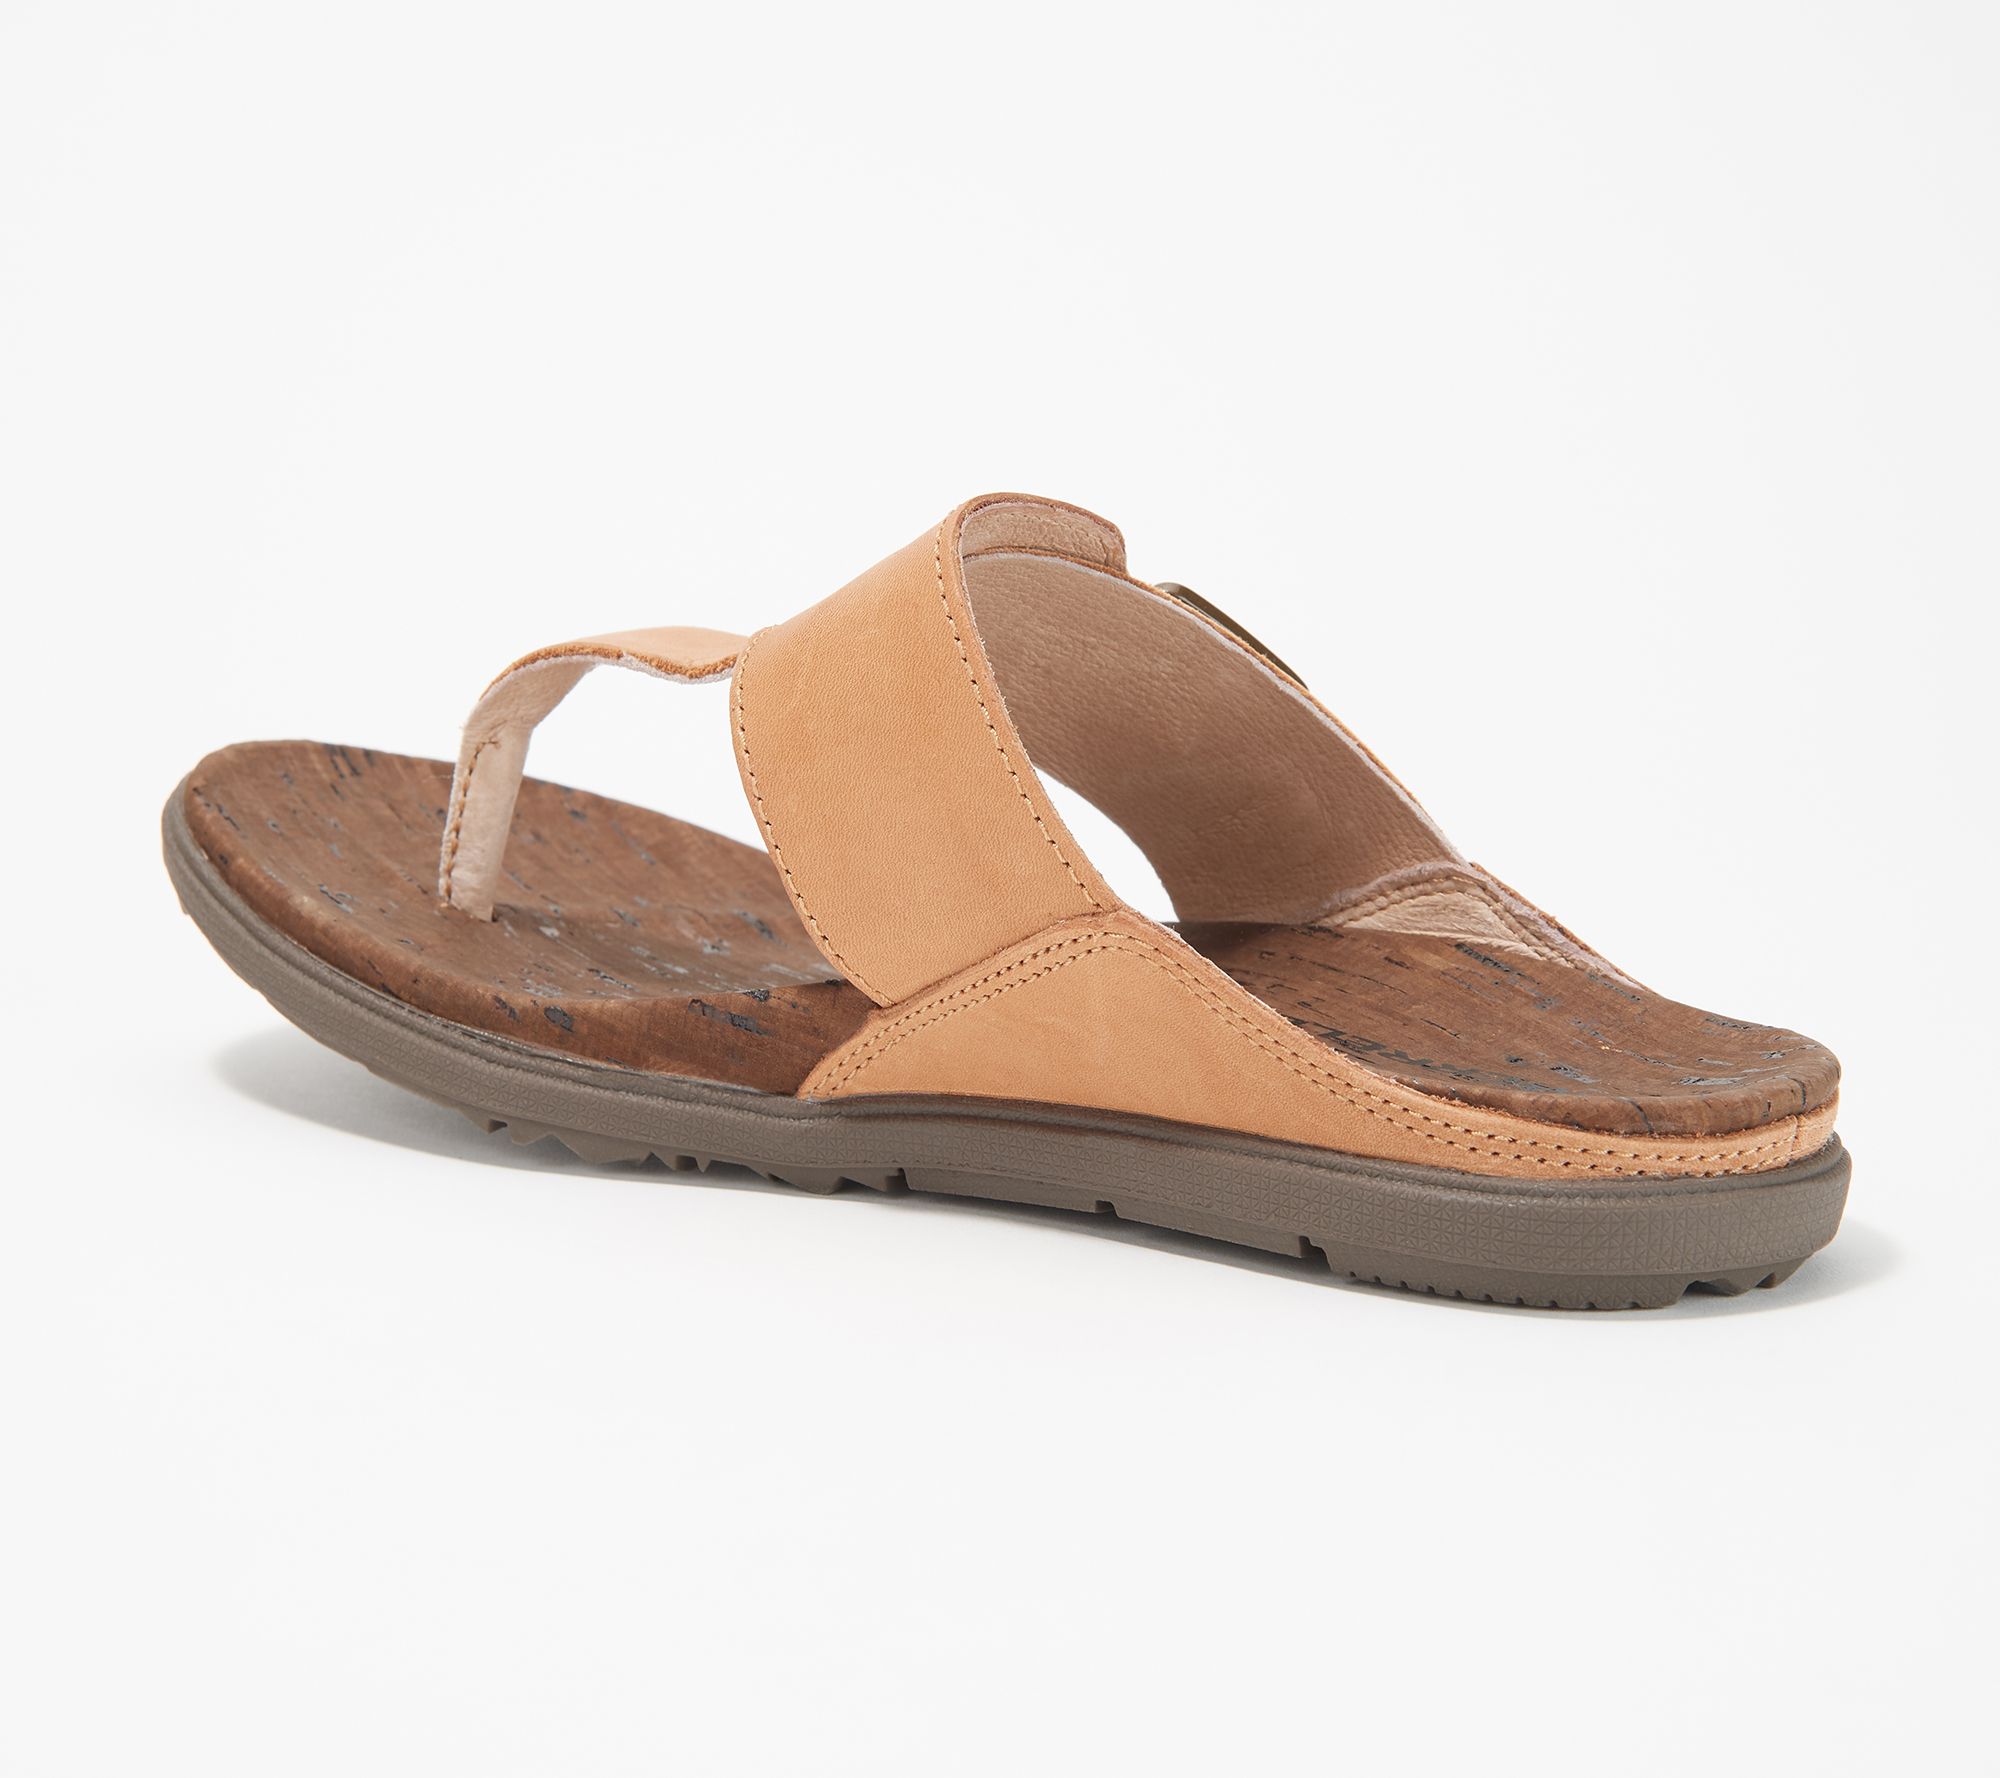 Merrell Leather Thong Sandals - Around Town Luxe Post - QVC.com